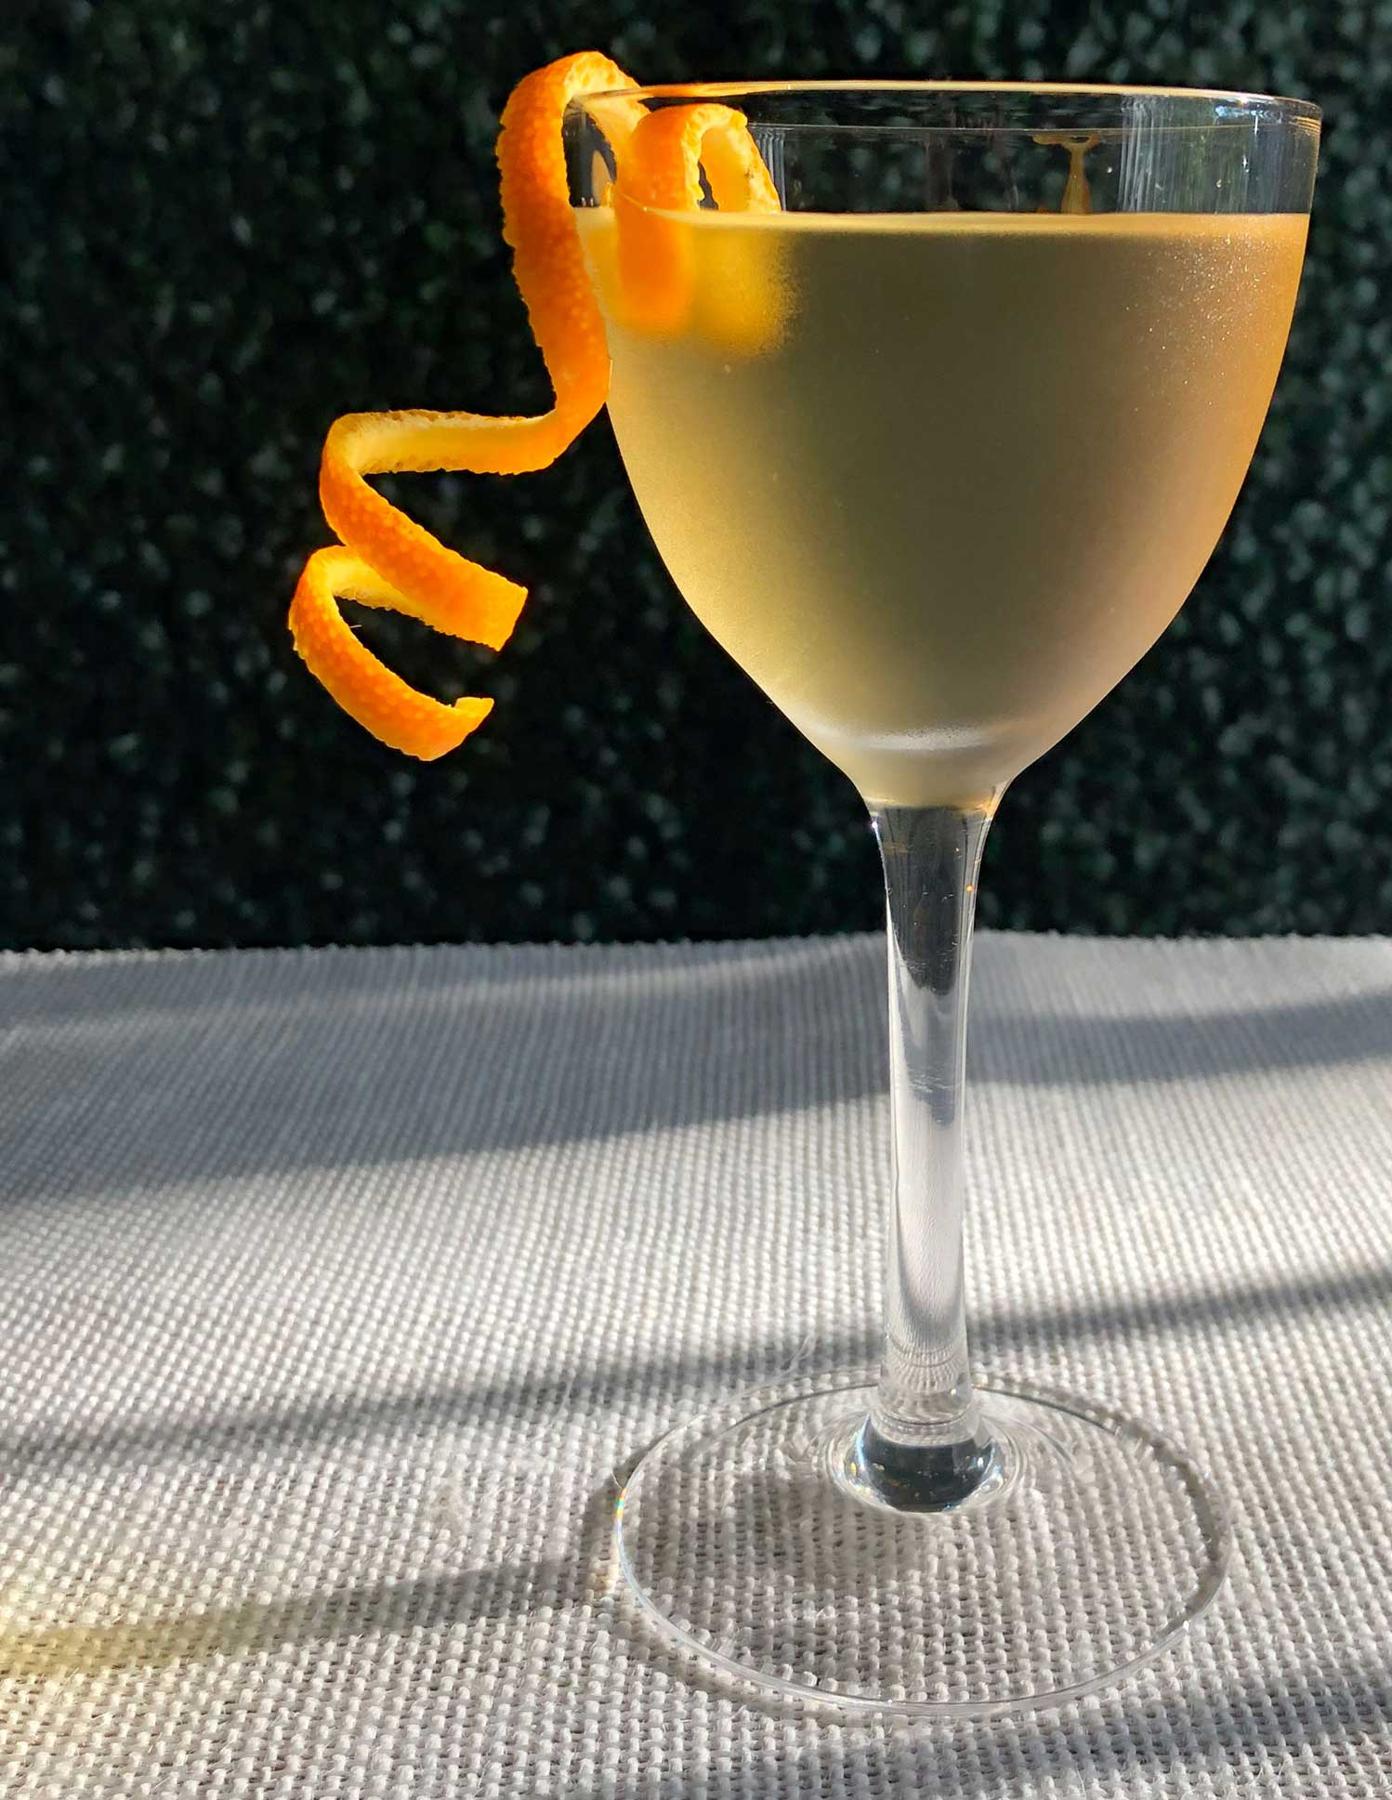 An example of the The Stirrup, the mixed drink (drink) featuring blanco tequila, Comoz Blanc Vermouth de Chambèry, KRONAN Swedish Punsch, and orange twist; photo by Lee Edwards